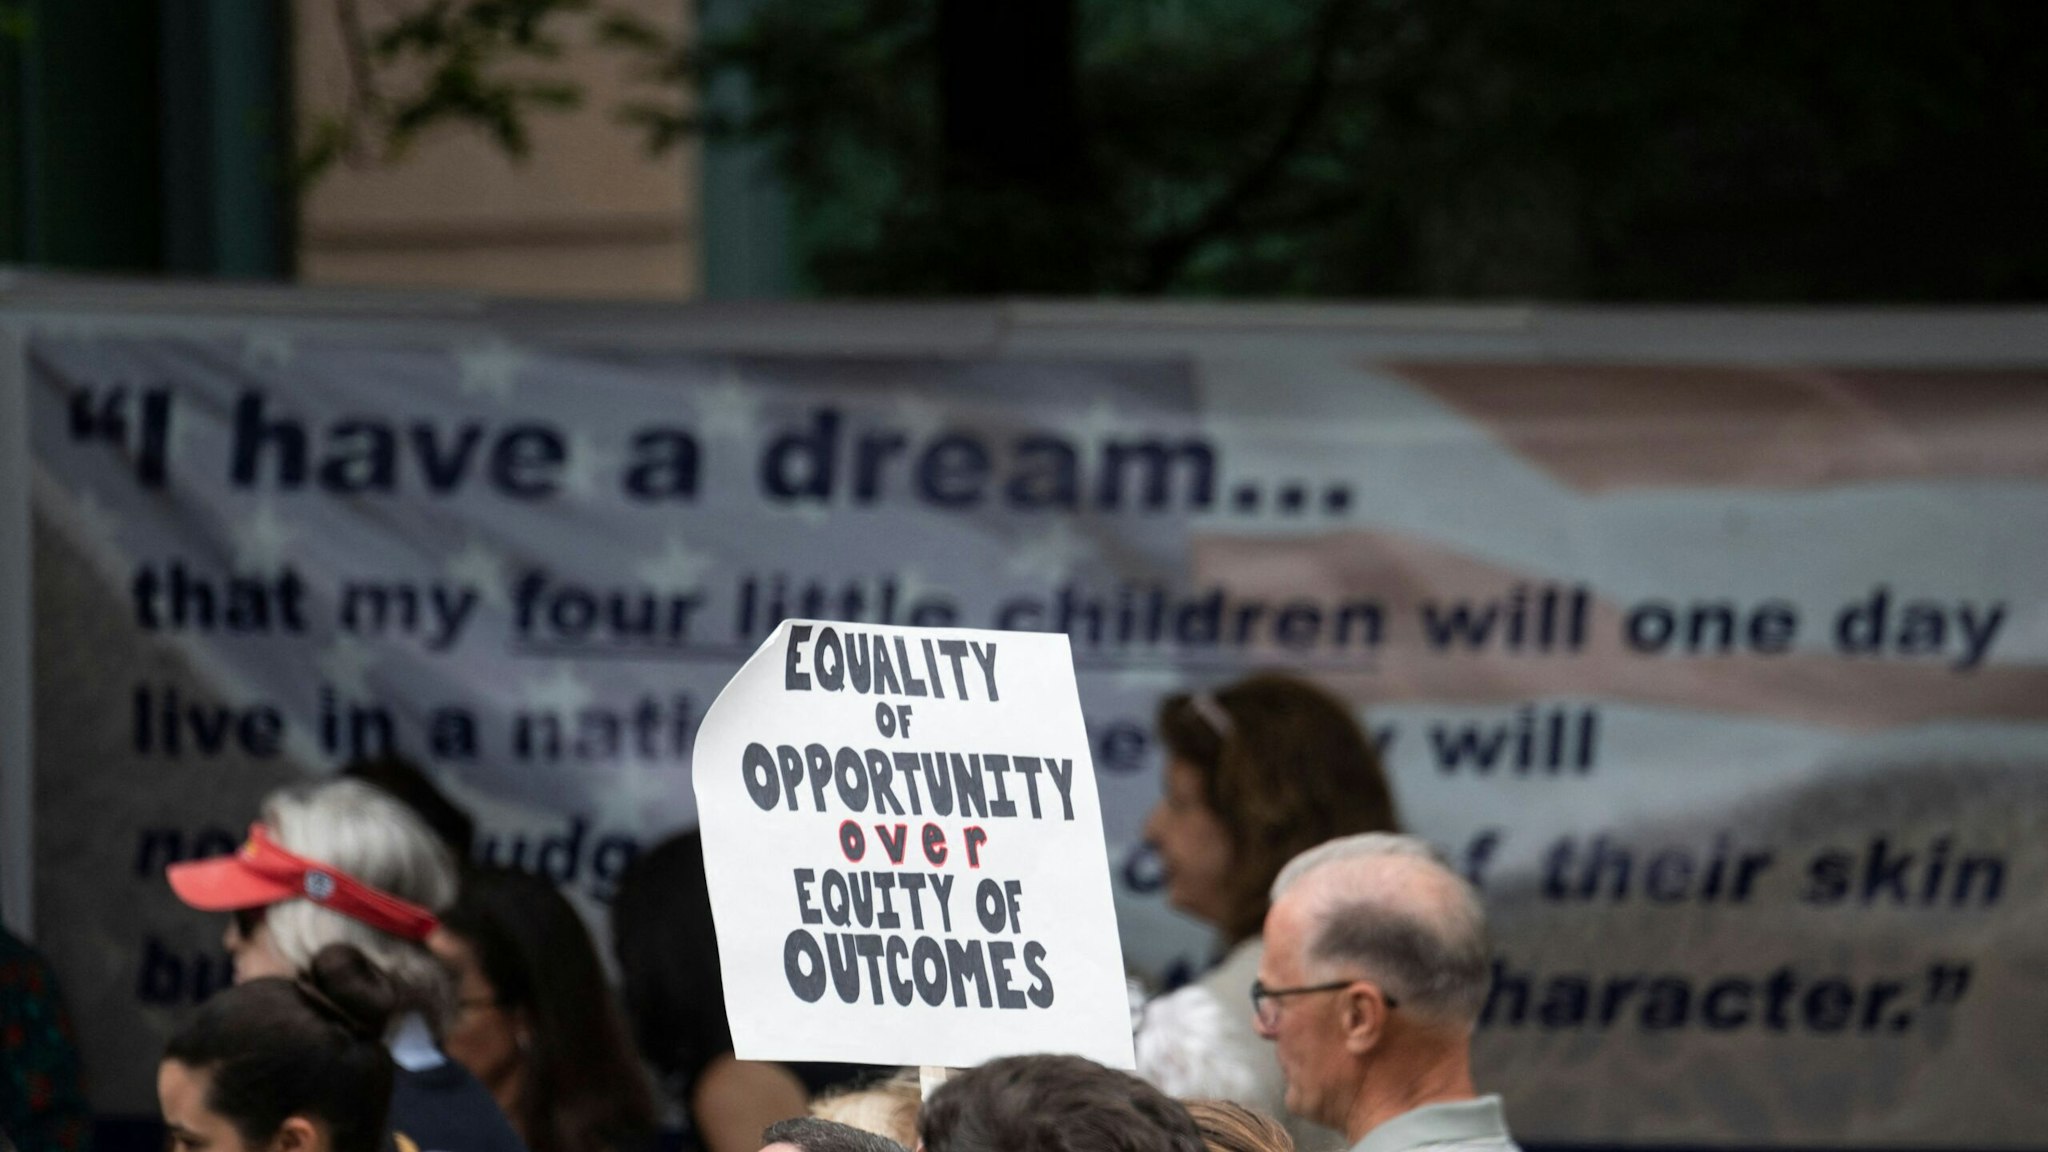 A participant holds up a sign during a rally against "critical race theory" (CRT) being taught in schools at the Loudoun County Government center in Leesburg, Virginia on June 12, 2021. - "Are you ready to take back our schools?" Republican activist Patti Menders shouted at a rally opposing anti-racism teaching that critics like her say trains white children to see themselves as "oppressors." "Yes!", answered in unison the hundreds of demonstrators gathered this weekend near Washington to fight against "critical race theory," the latest battleground of America's ongoing culture wars. The term "critical race theory" defines a strand of thought that appeared in American law schools in the late 1970s and which looks at racism as a system, enabled by laws and institutions, rather than at the level of individual prejudices. But critics use it as a catch-all phrase that attacks teachers' efforts to confront dark episodes in American history, including slavery and segregation, as well as to tackle racist stereotypes. (Photo by ANDREW CABALLERO-REYNOLDS / AFP) (Photo by ANDREW CABALLERO-REYNOLDS/AFP via Getty Images)